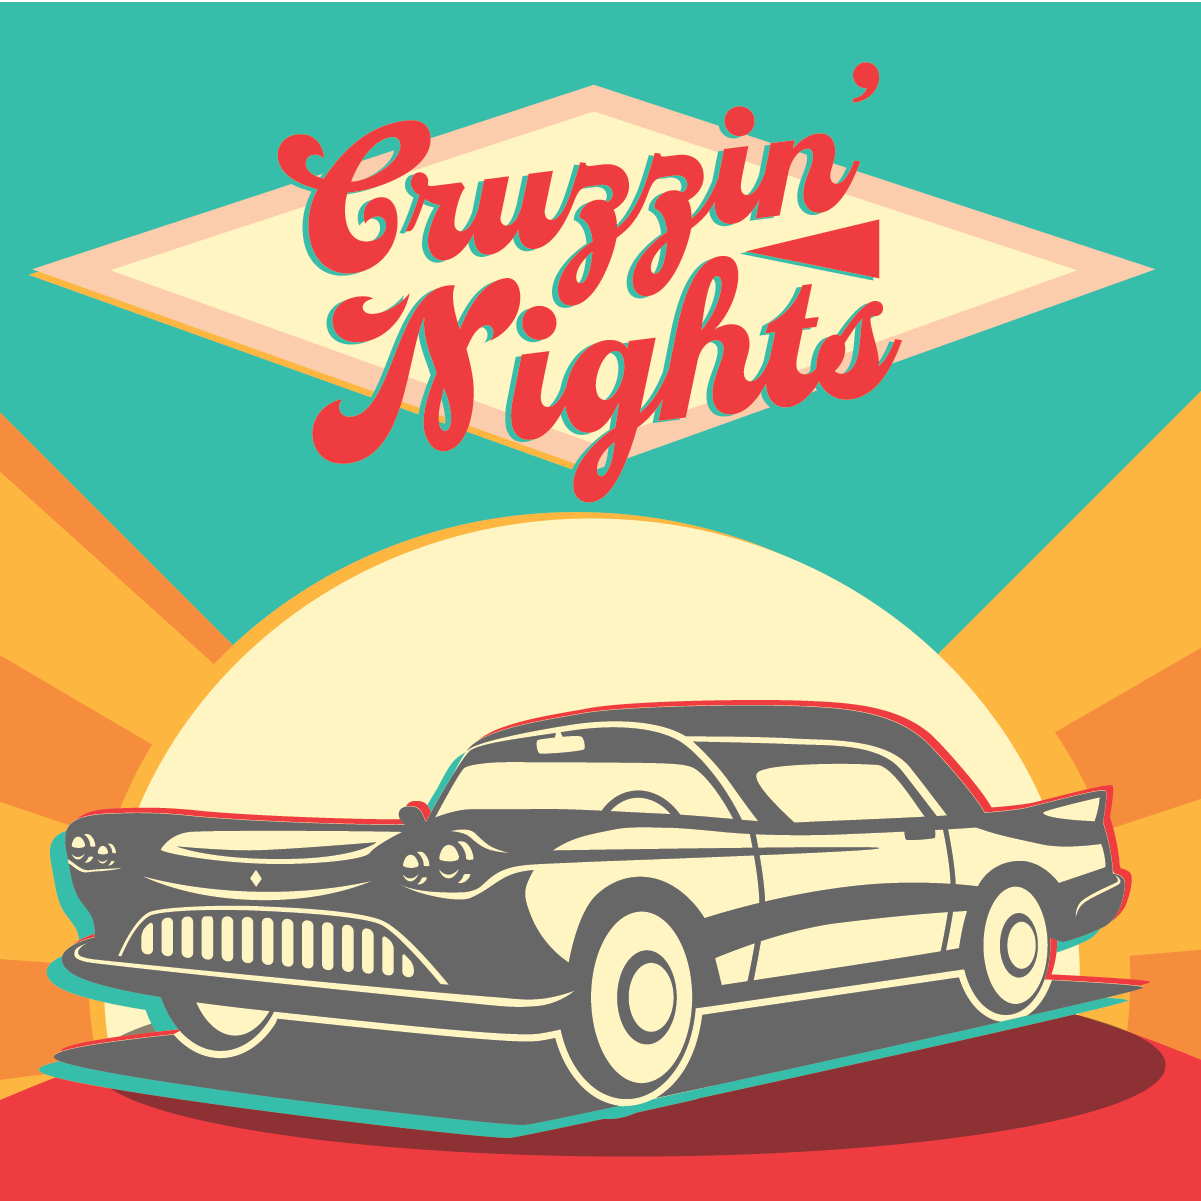 Cruise Nights are Here!